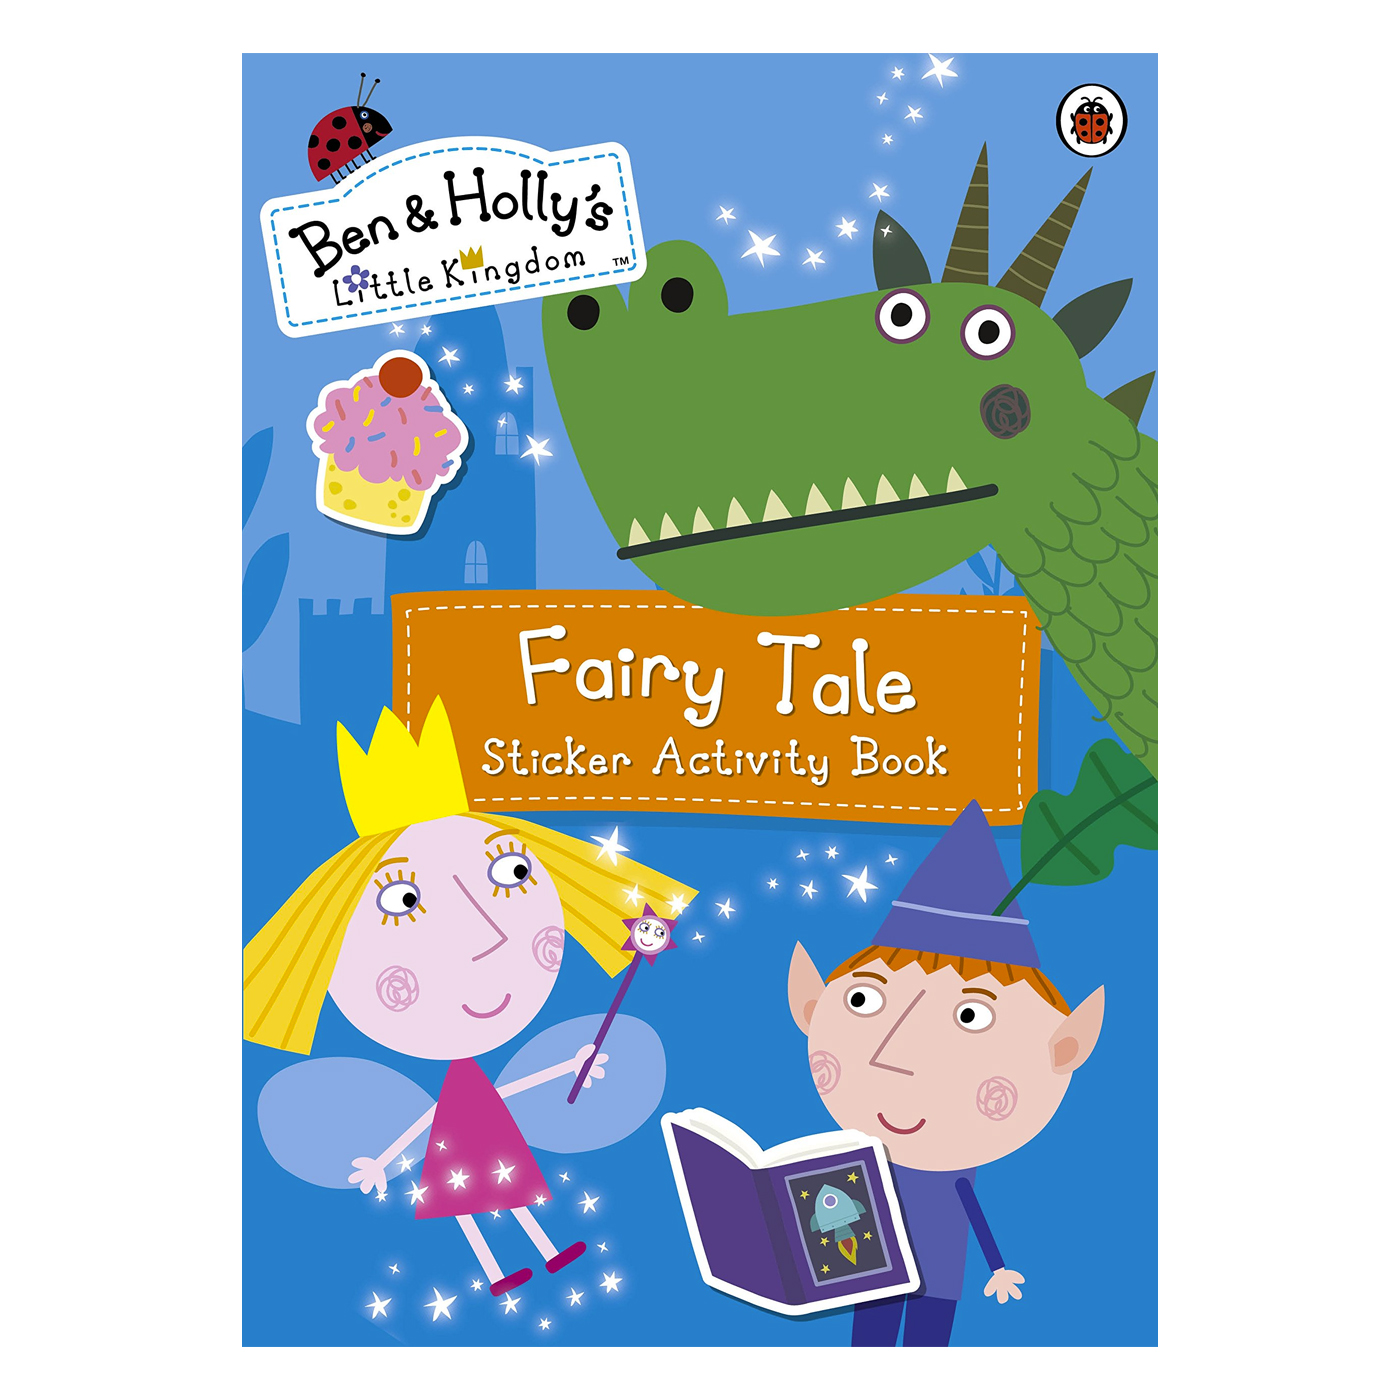  Ben and Hollys Little Kingdom: Fairy Tale Sticker Activity Book